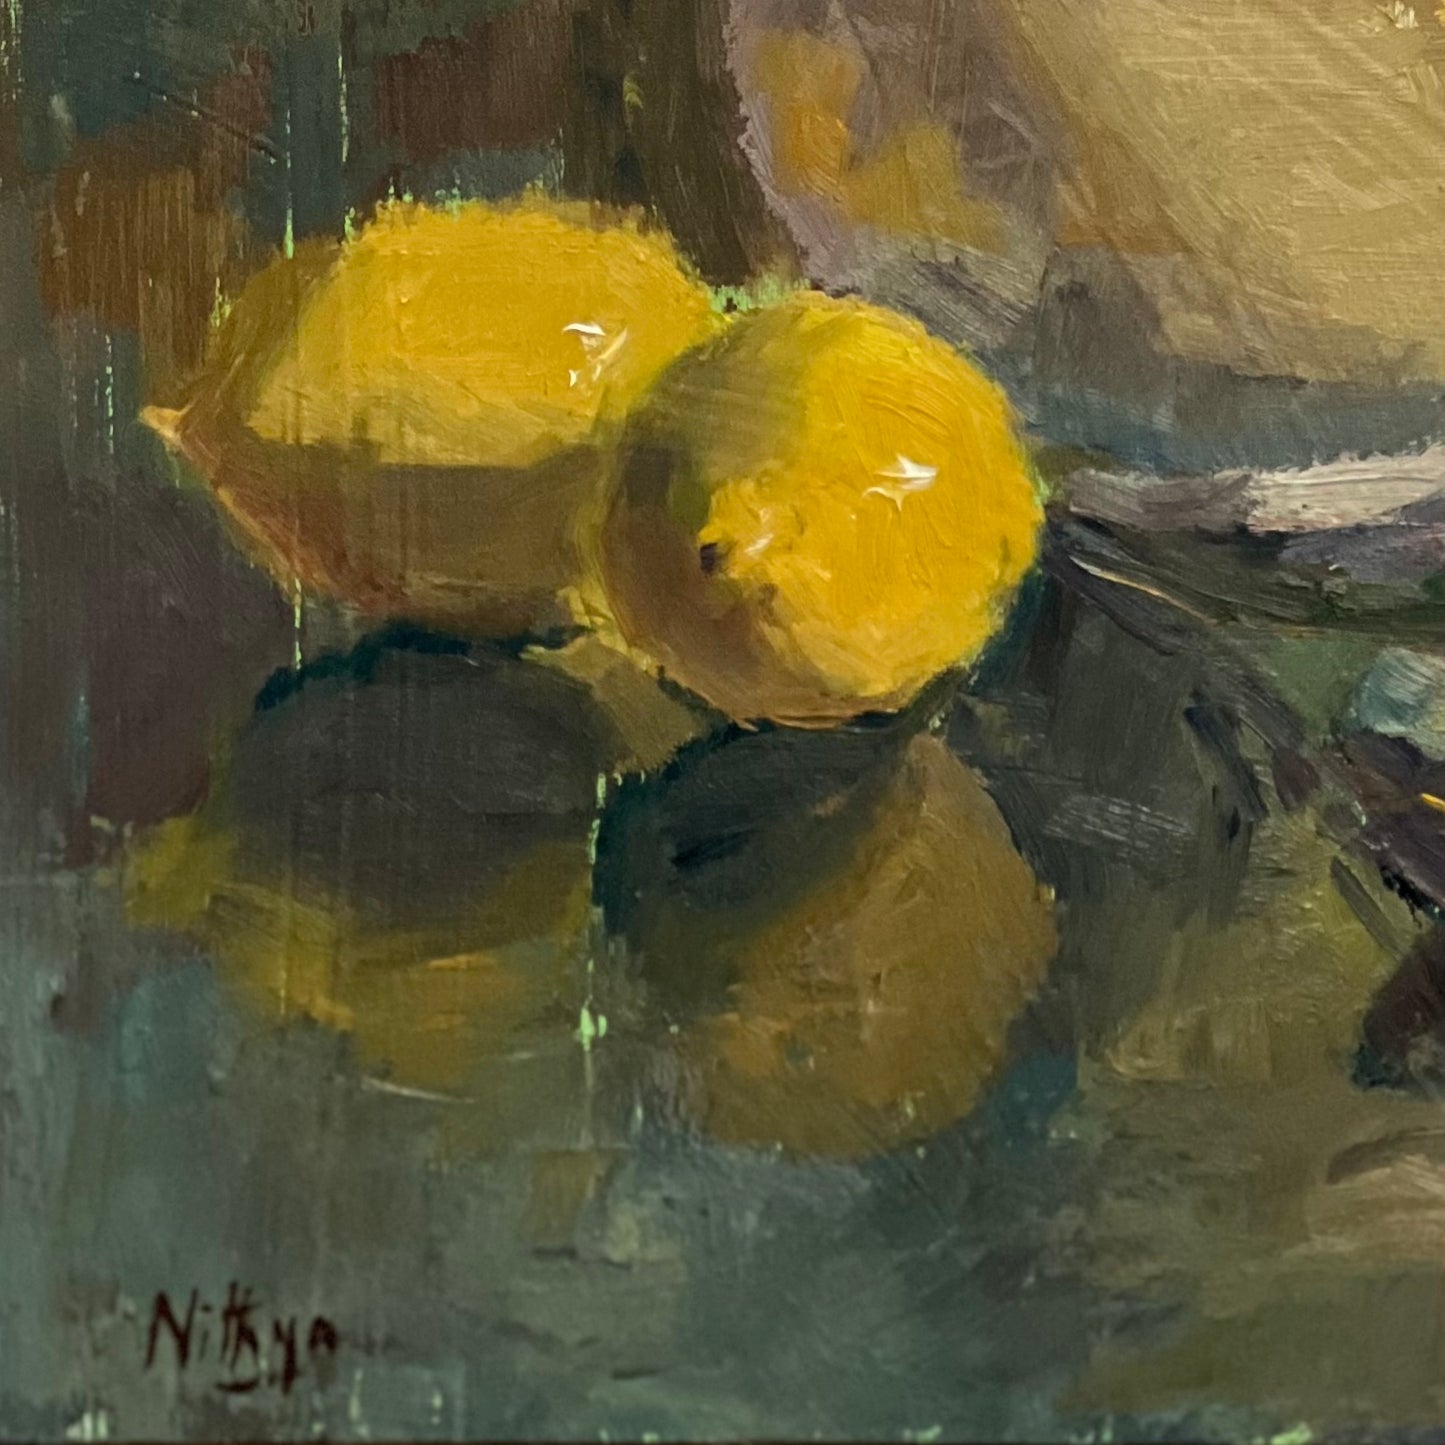 Pink and yellow with reflections - still life oil painting